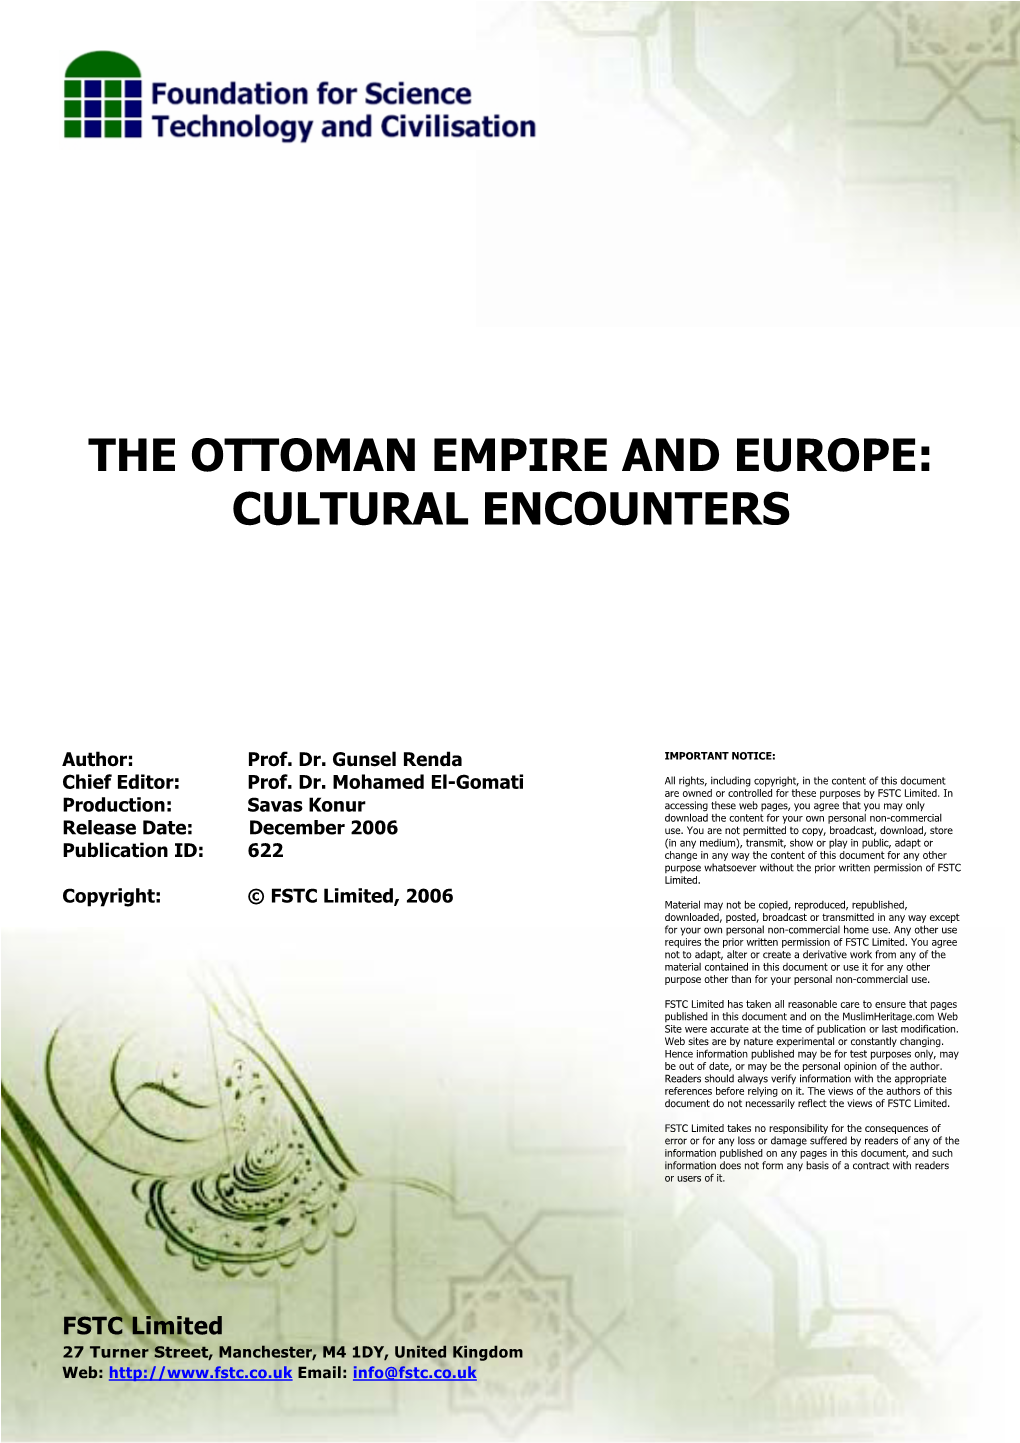 The Ottoman Empire and Europe: Cultural Encounters